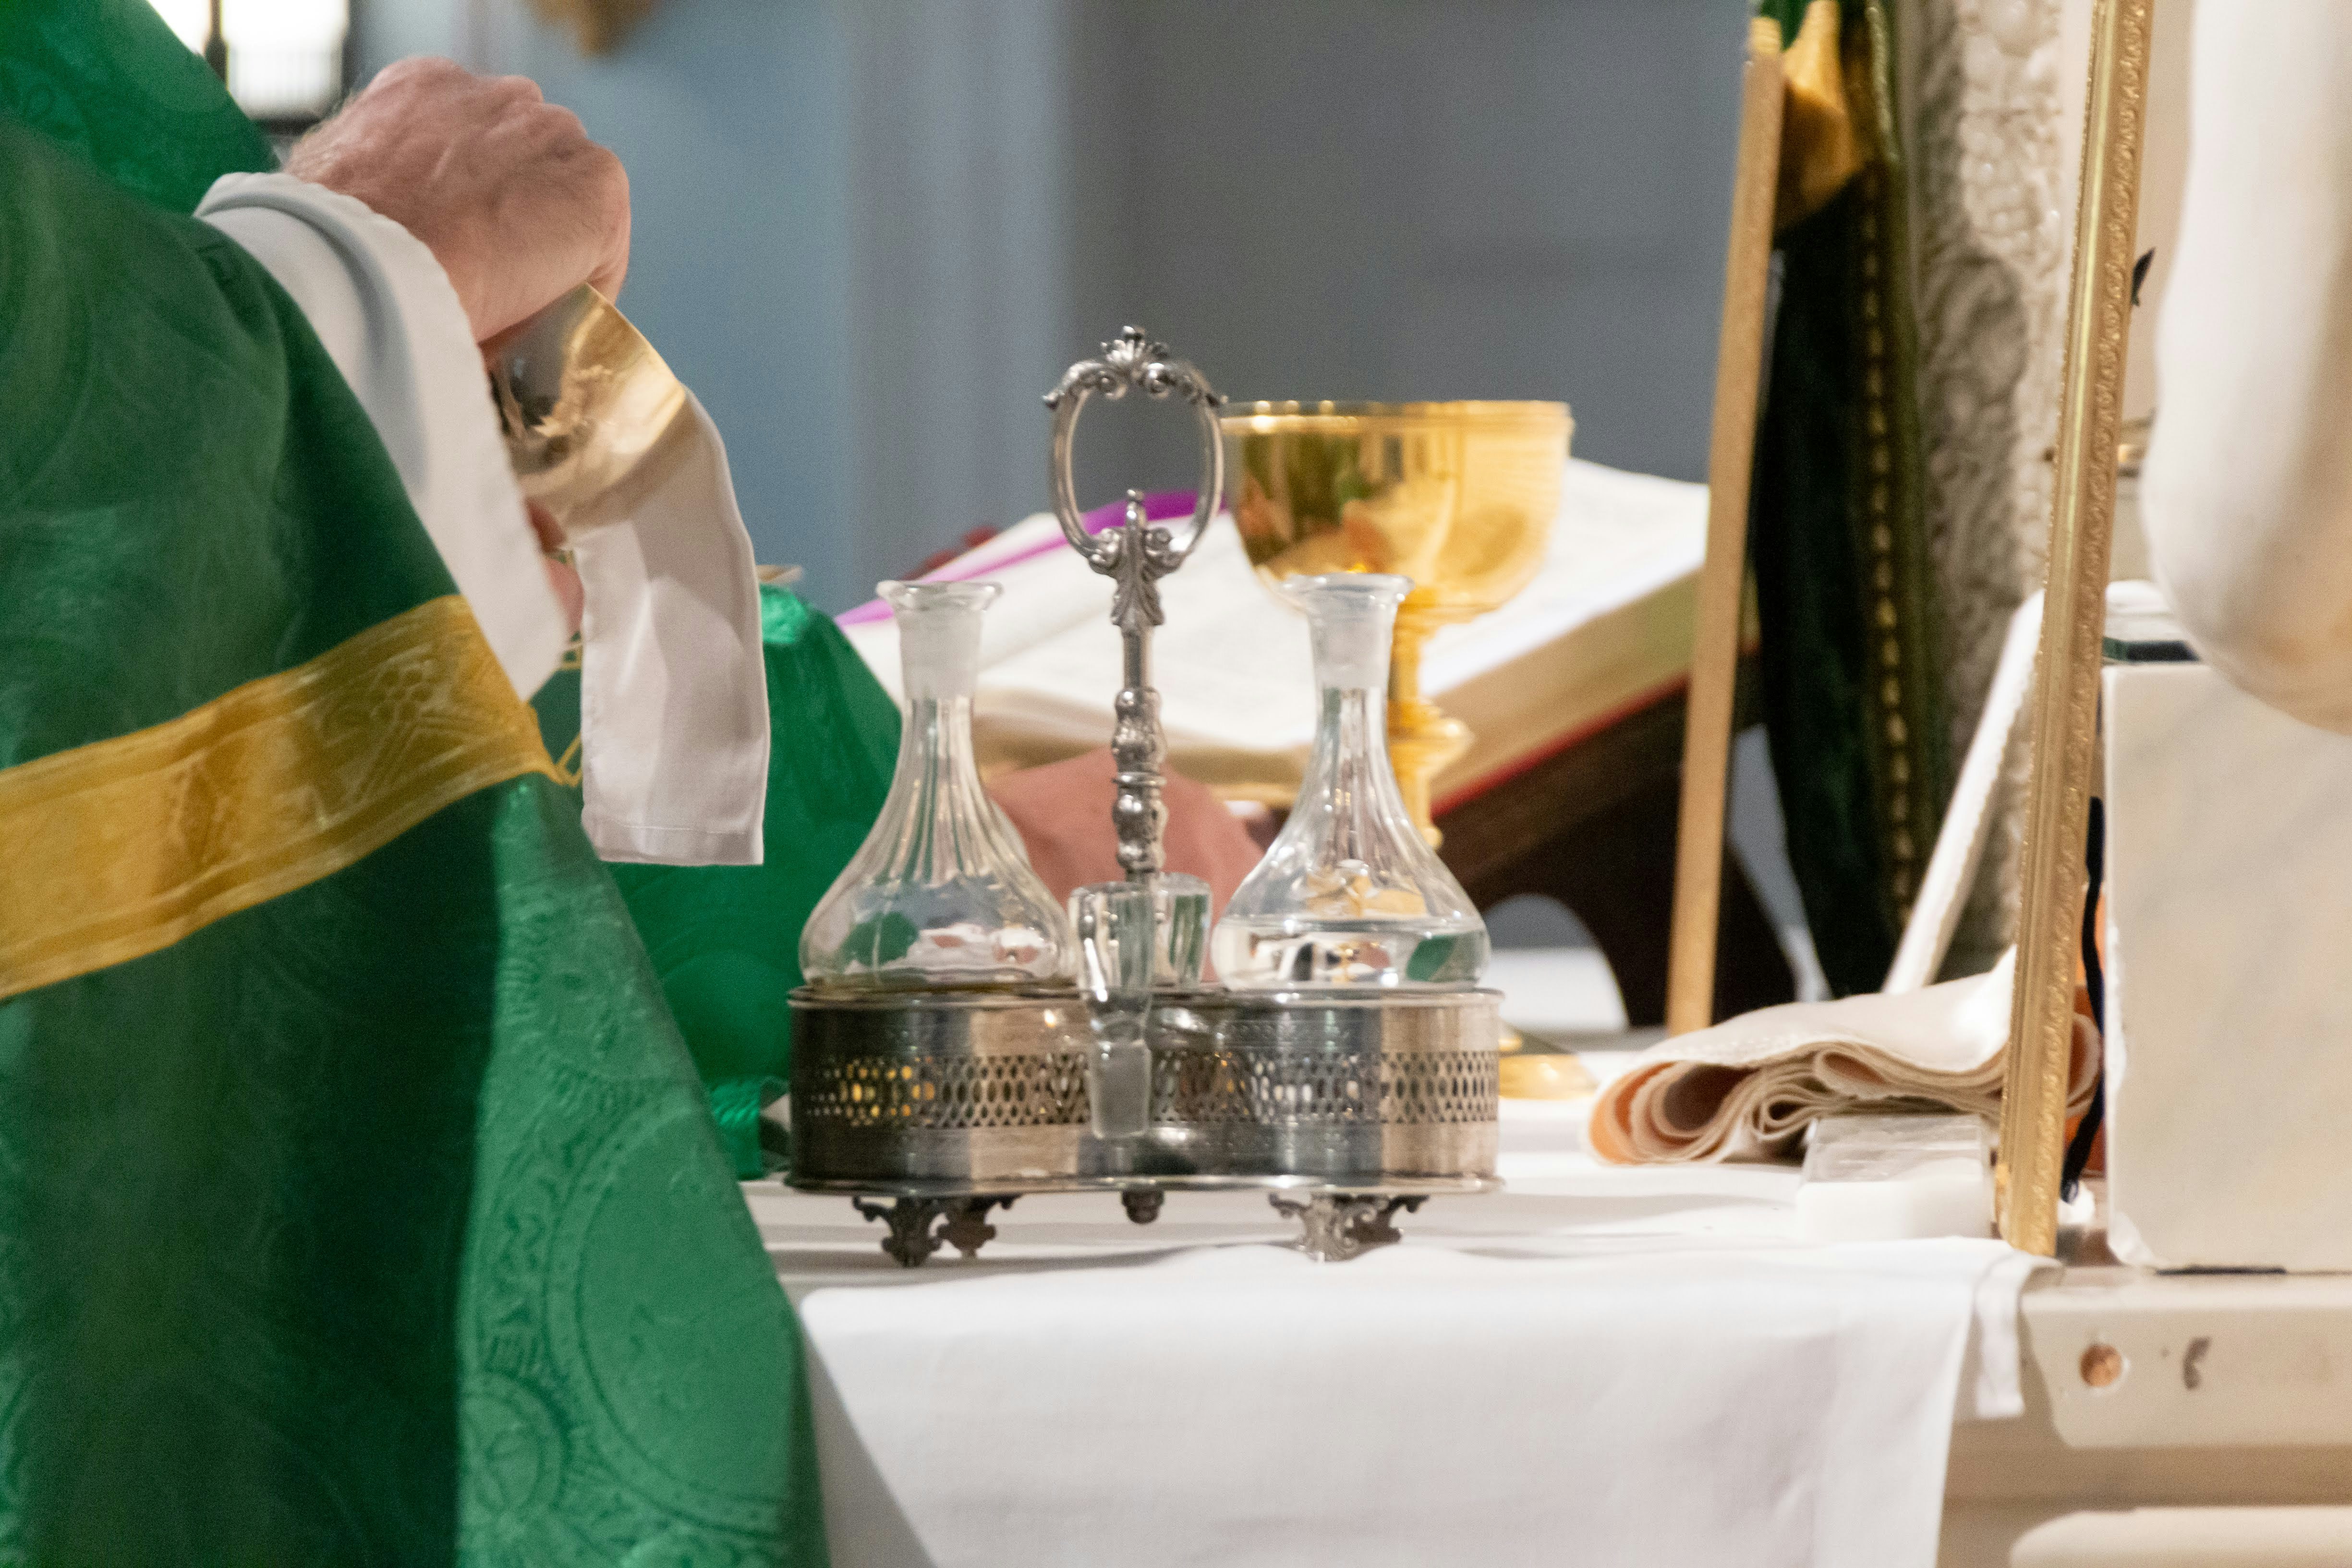 Water and Wine at Mass